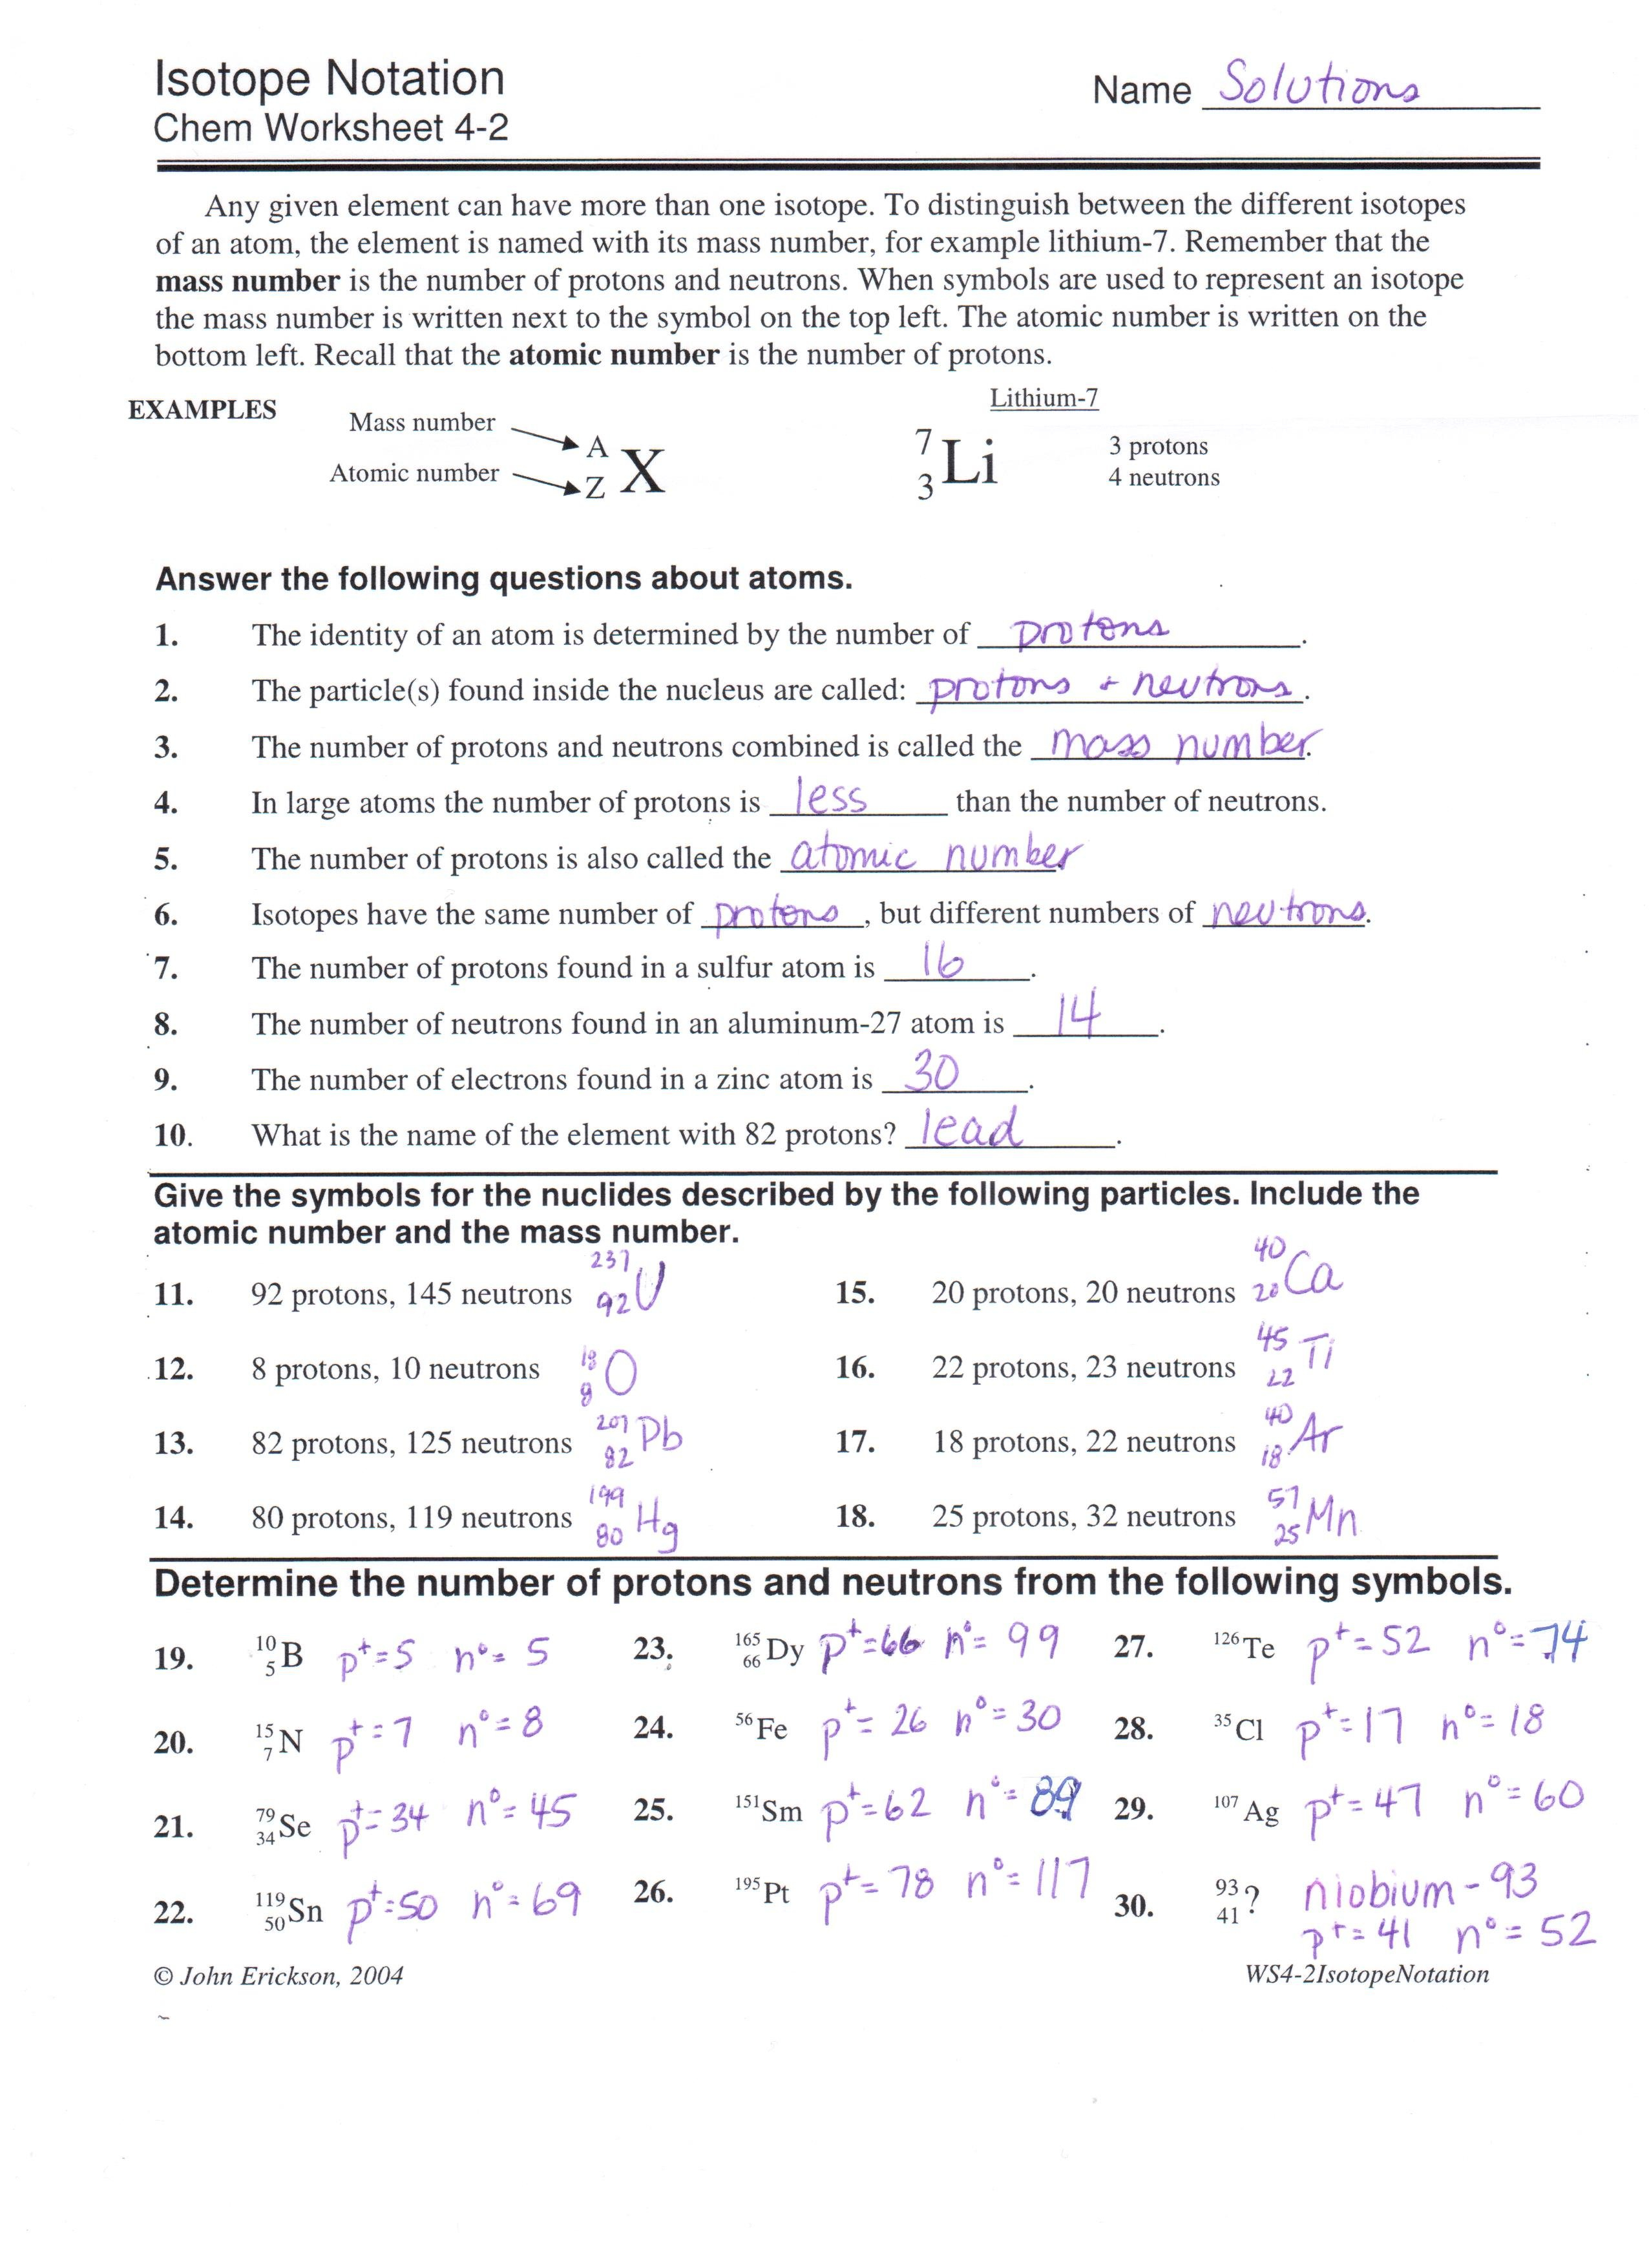 Unit 2  Chapters 4 5  6  Mrs Gingras' Chemistry Page For Isotope Notation Chem Worksheet 4 2